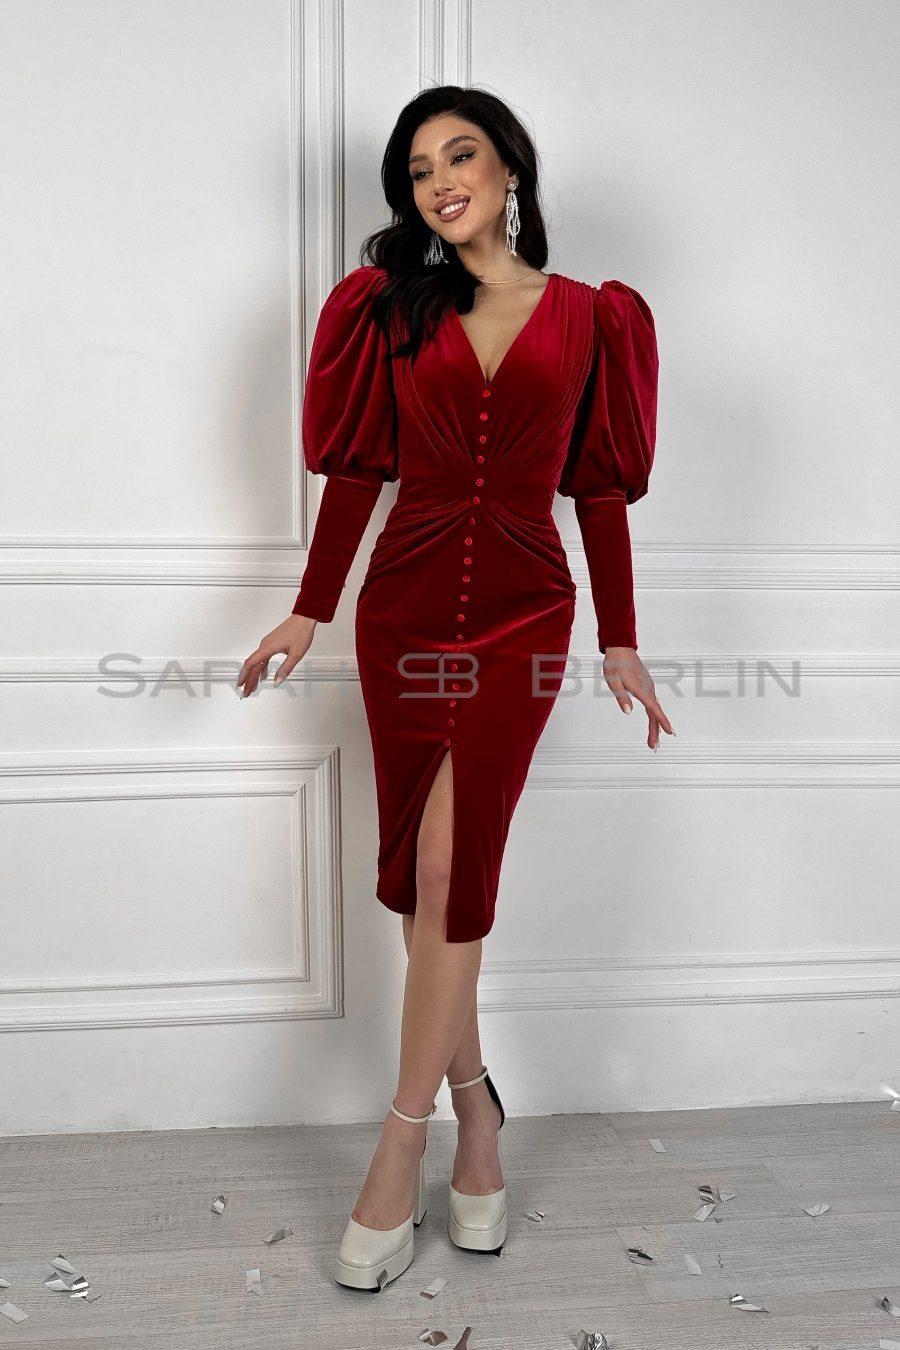 Velvet dress with draping, puff sleeves, satin buttons